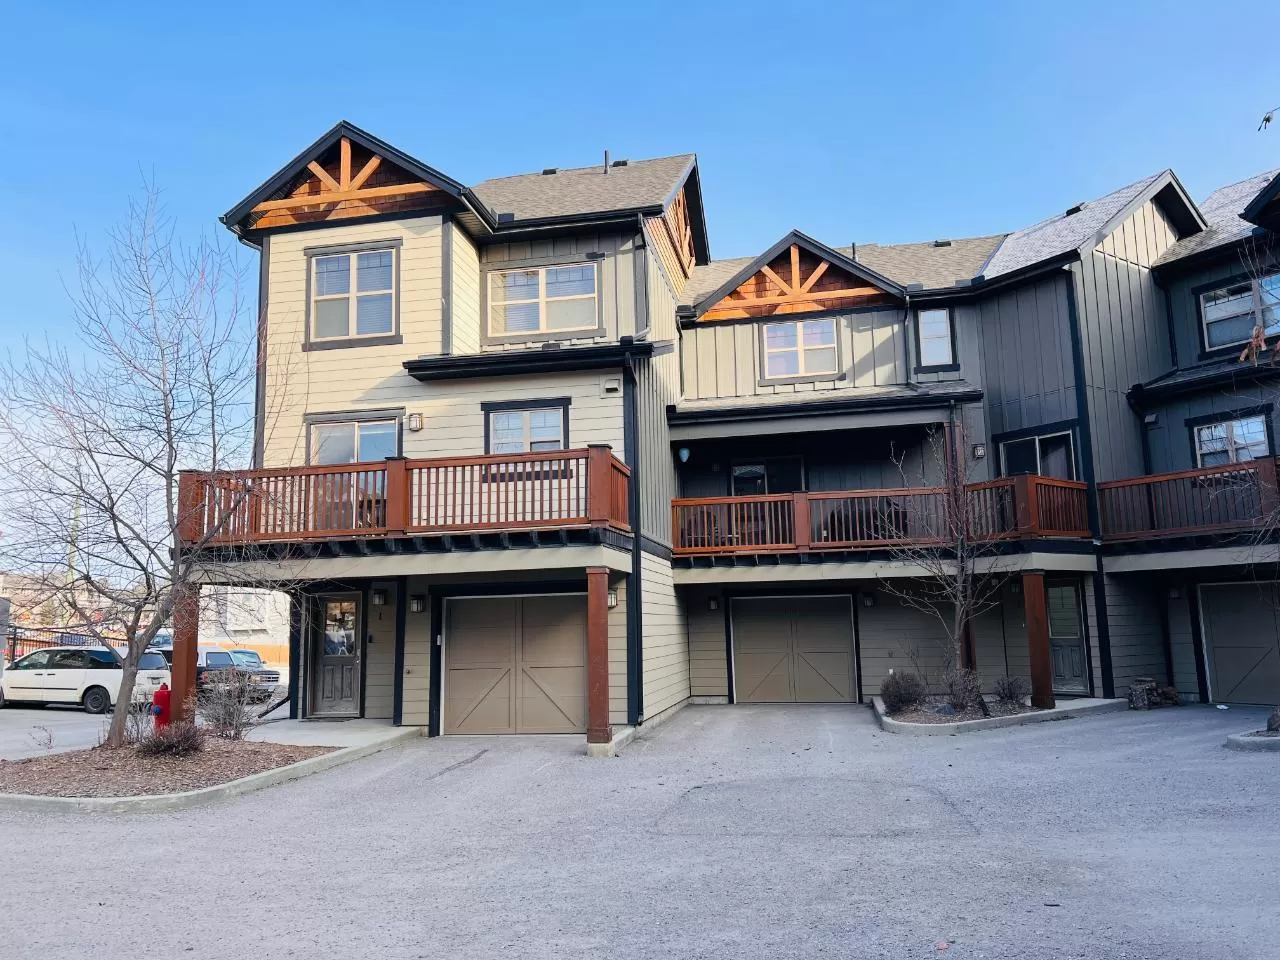 Row / Townhouse for rent: 1 - 1000 9th Street, Invermere, British Columbia V0A 1K0